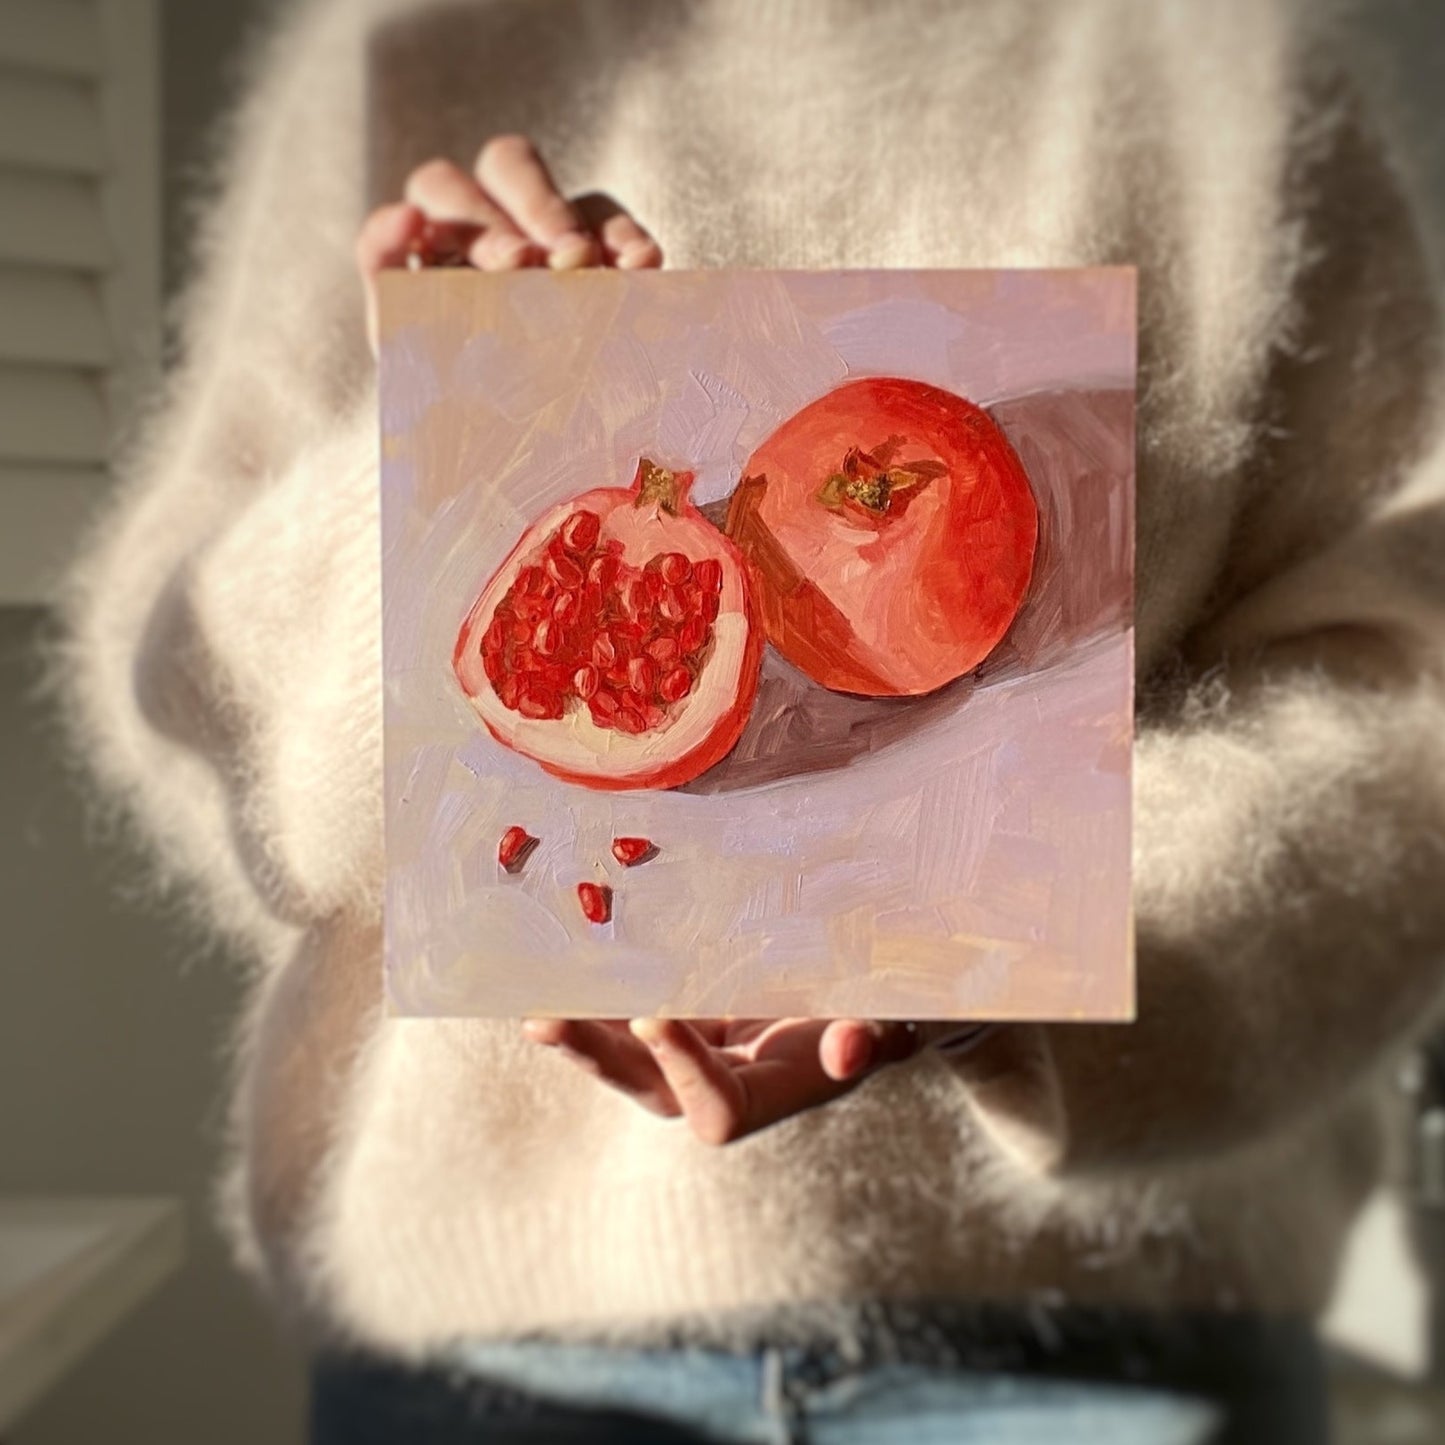 image of a person holding an original oil painting of a whole pomegranate and a cut pomegranate with seeds lying on a soft and smooth lilac background with bits of yellow showing through